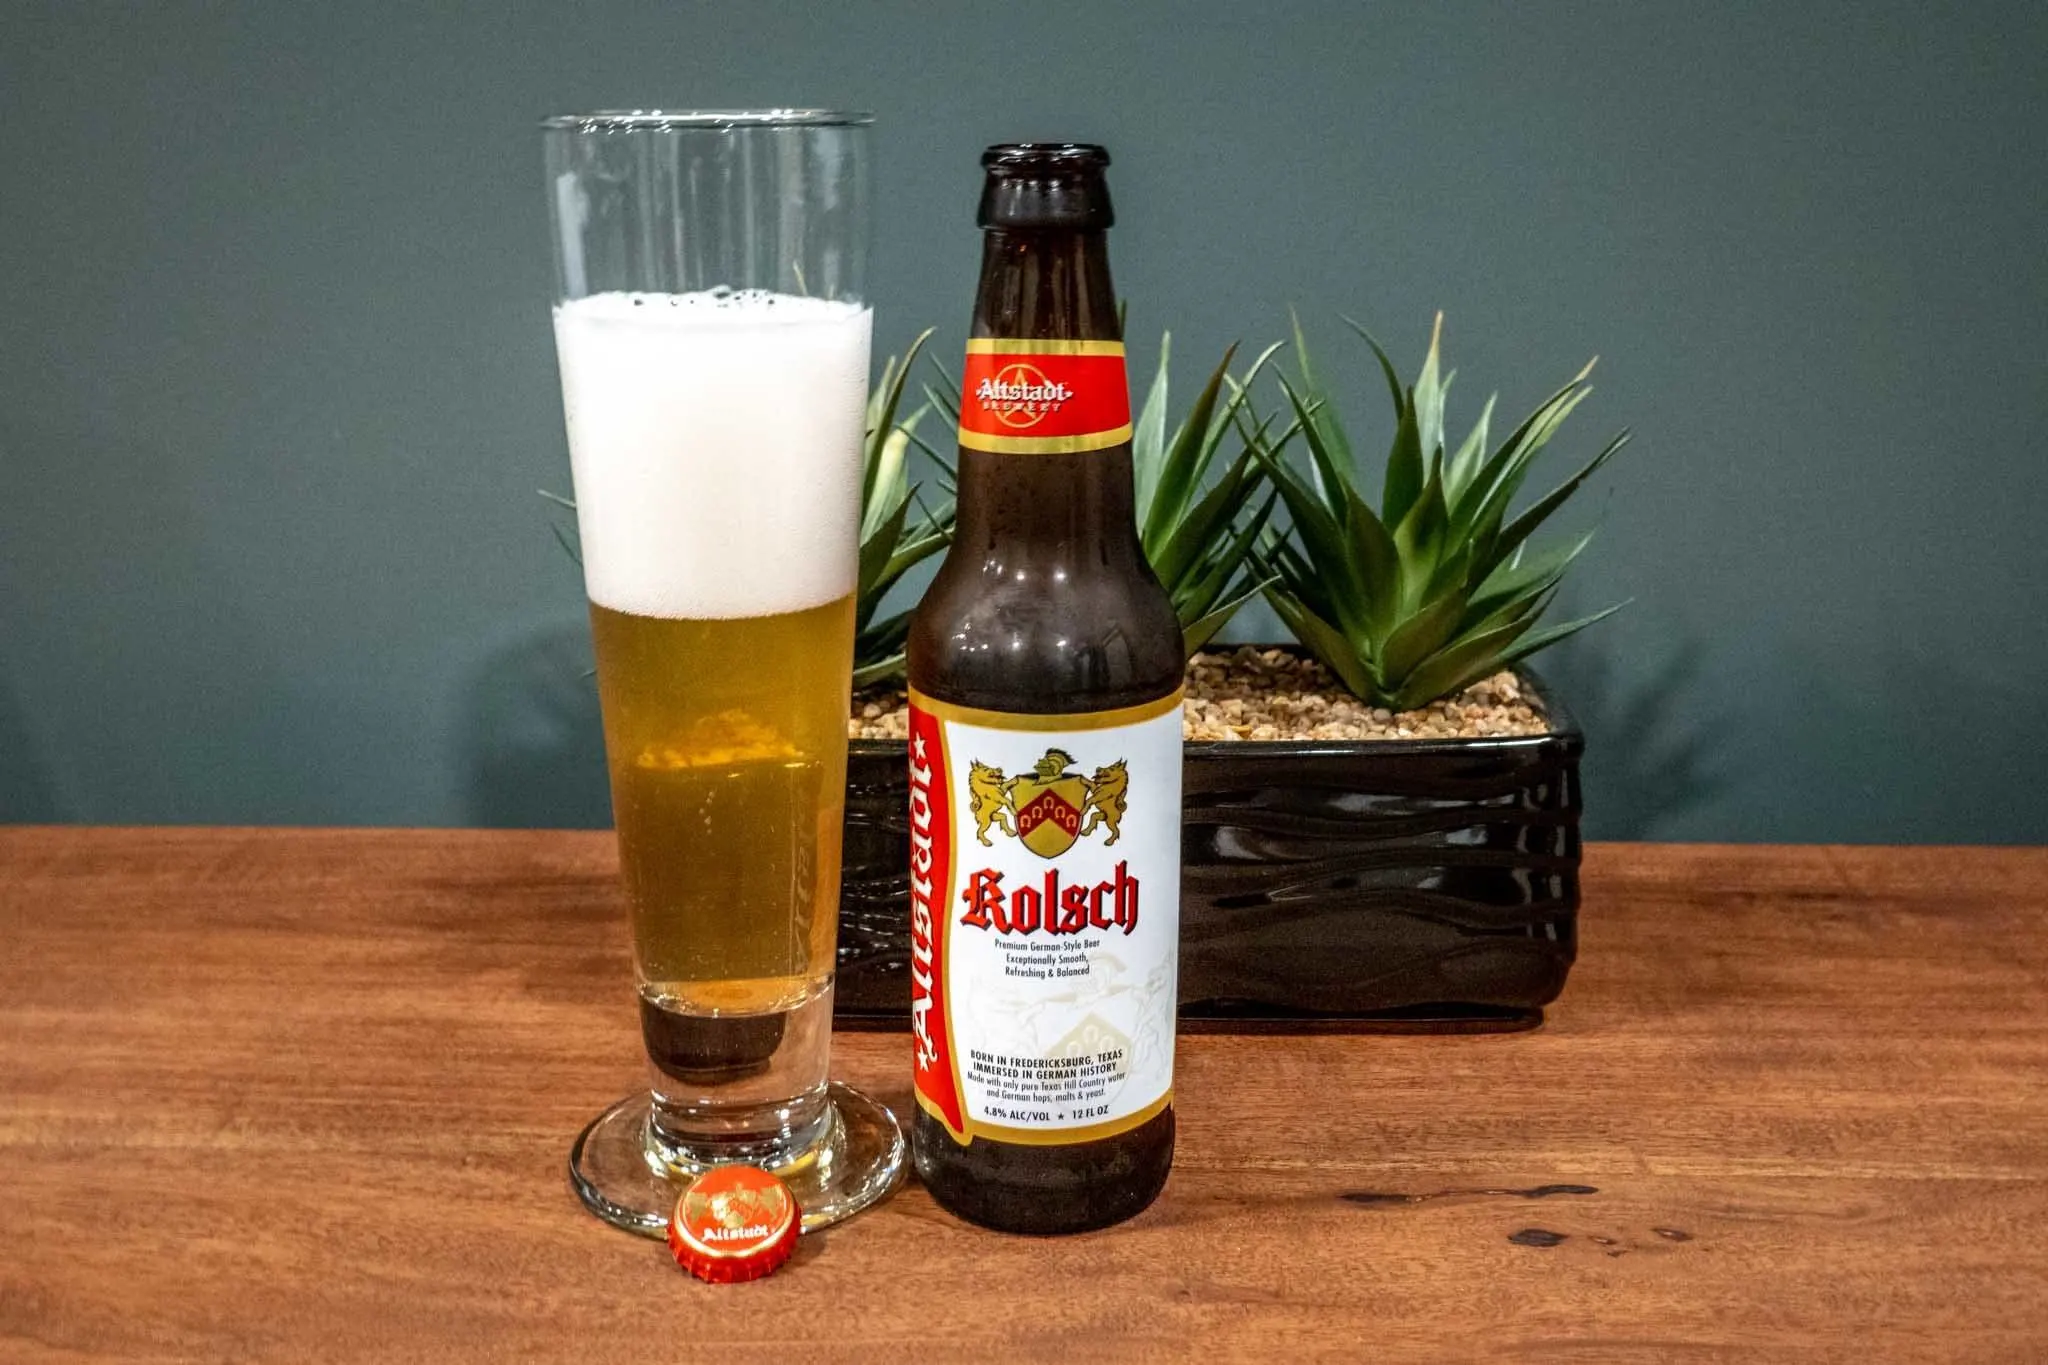 Glass and bottle of Kolsch beer on table